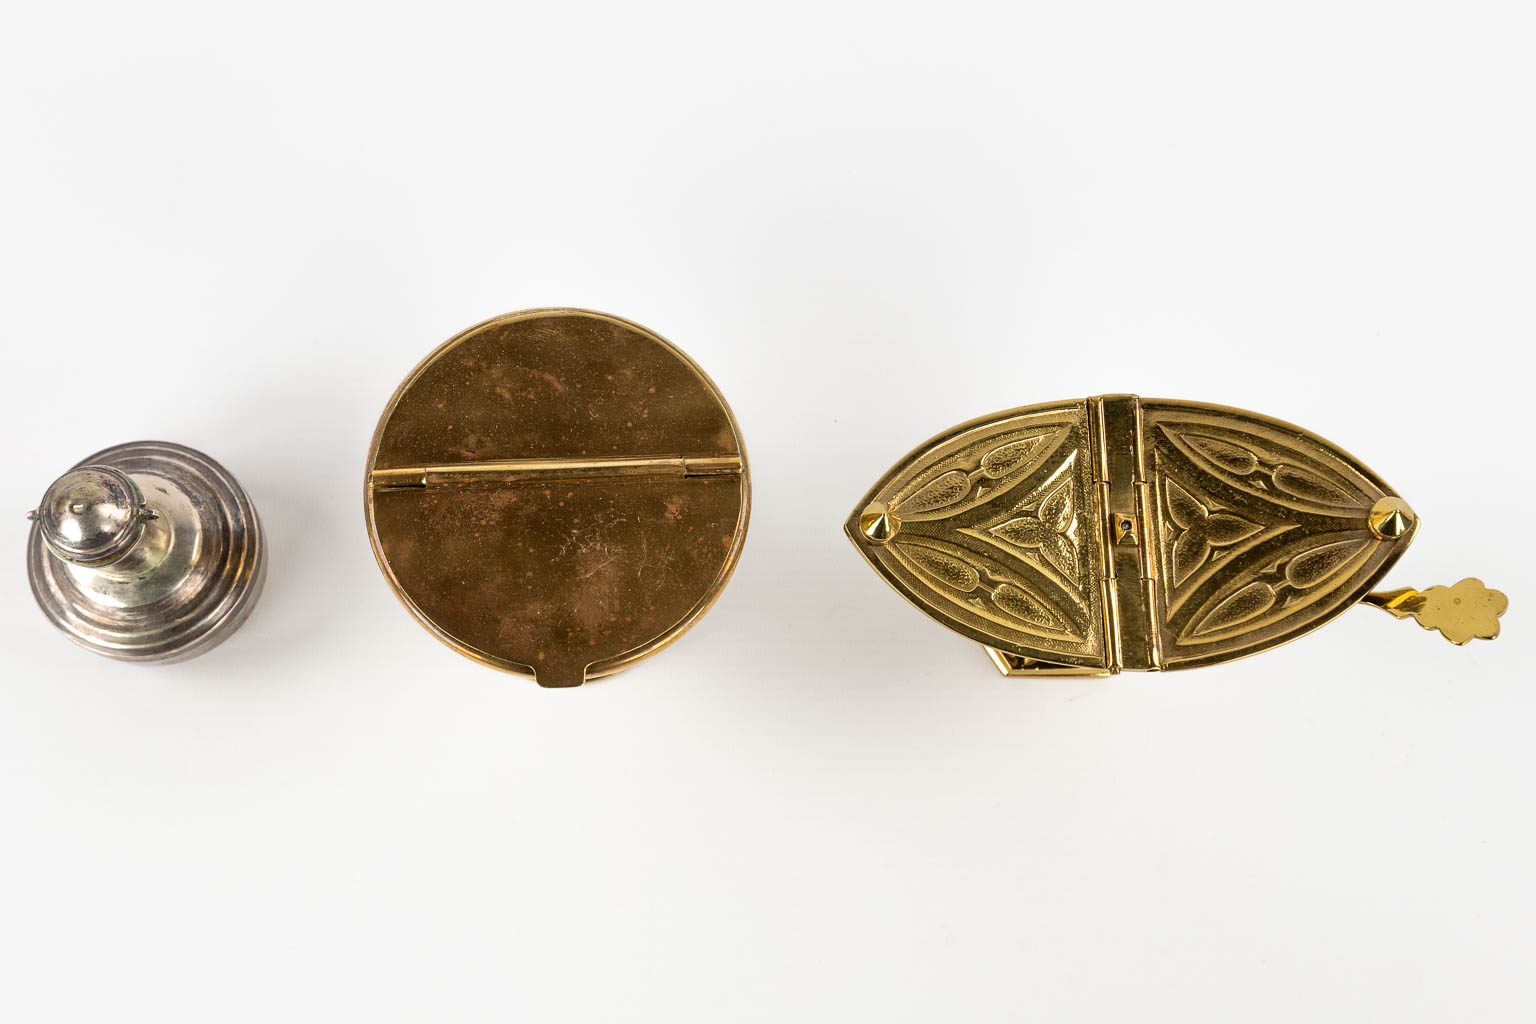 An assembled collection of Lithurgical accessories. 20th C. (H:34 x D:16 cm)